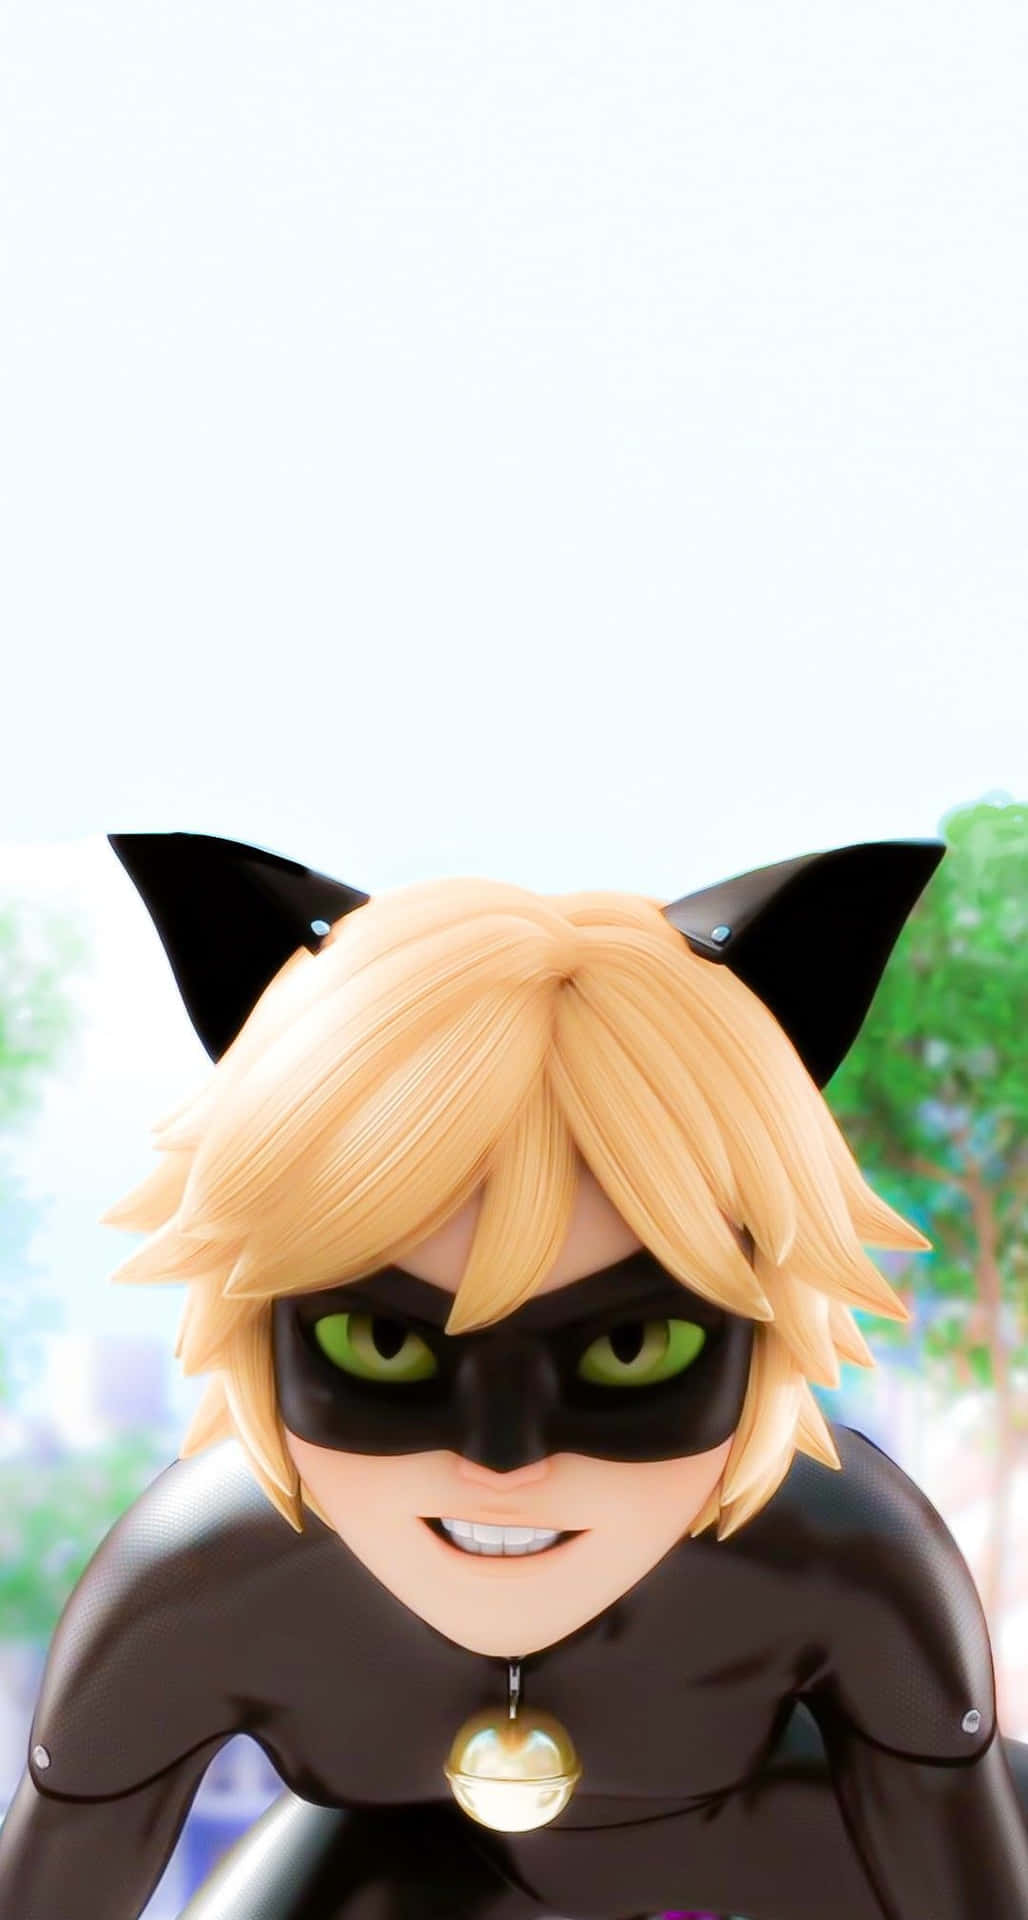 The mysterious Chat Noir Wallpaper